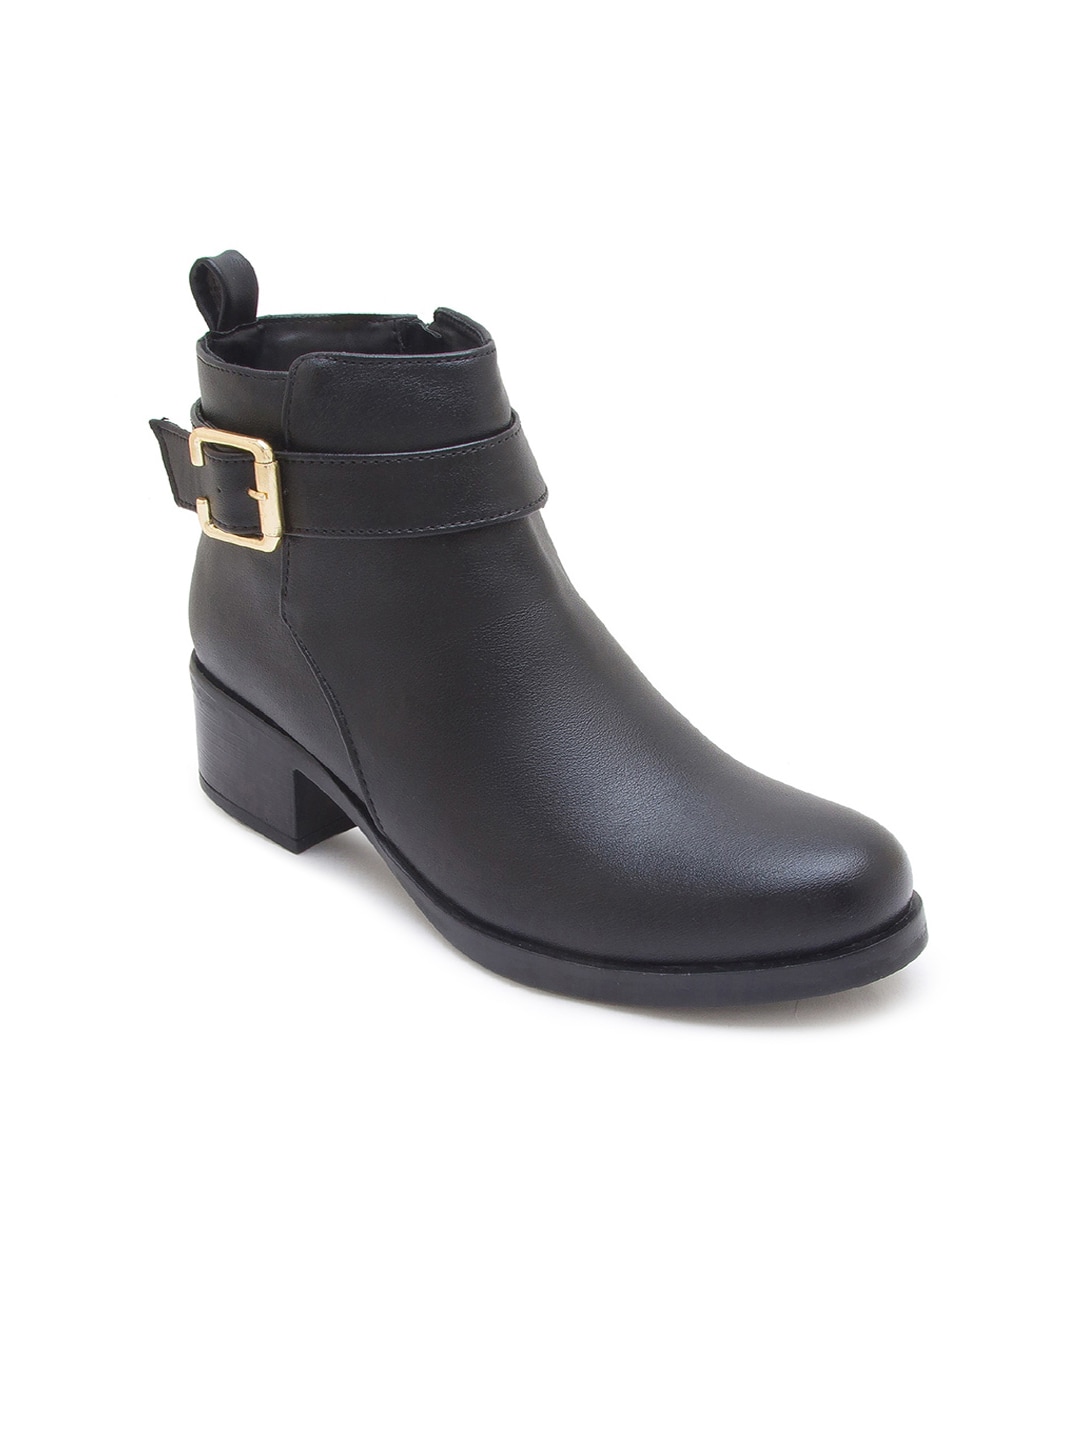 CERIZ Black Leather Block Heeled Boots with Buckles Price in India